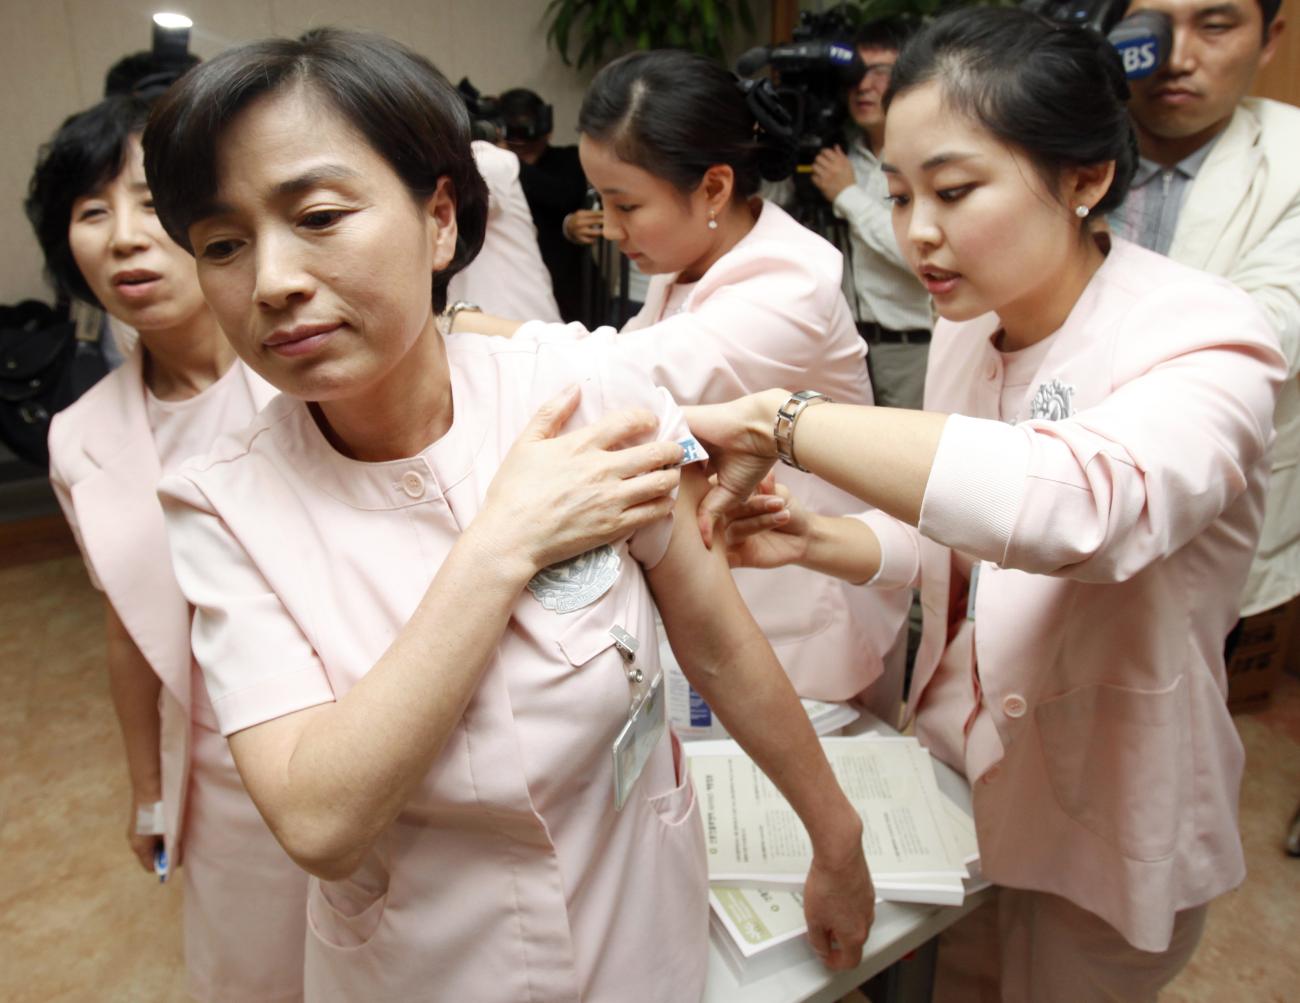 Medical workers of Soon Chun Hyang University Hospital receive H1N1 flu vaccines from their colleagues at the hospital.